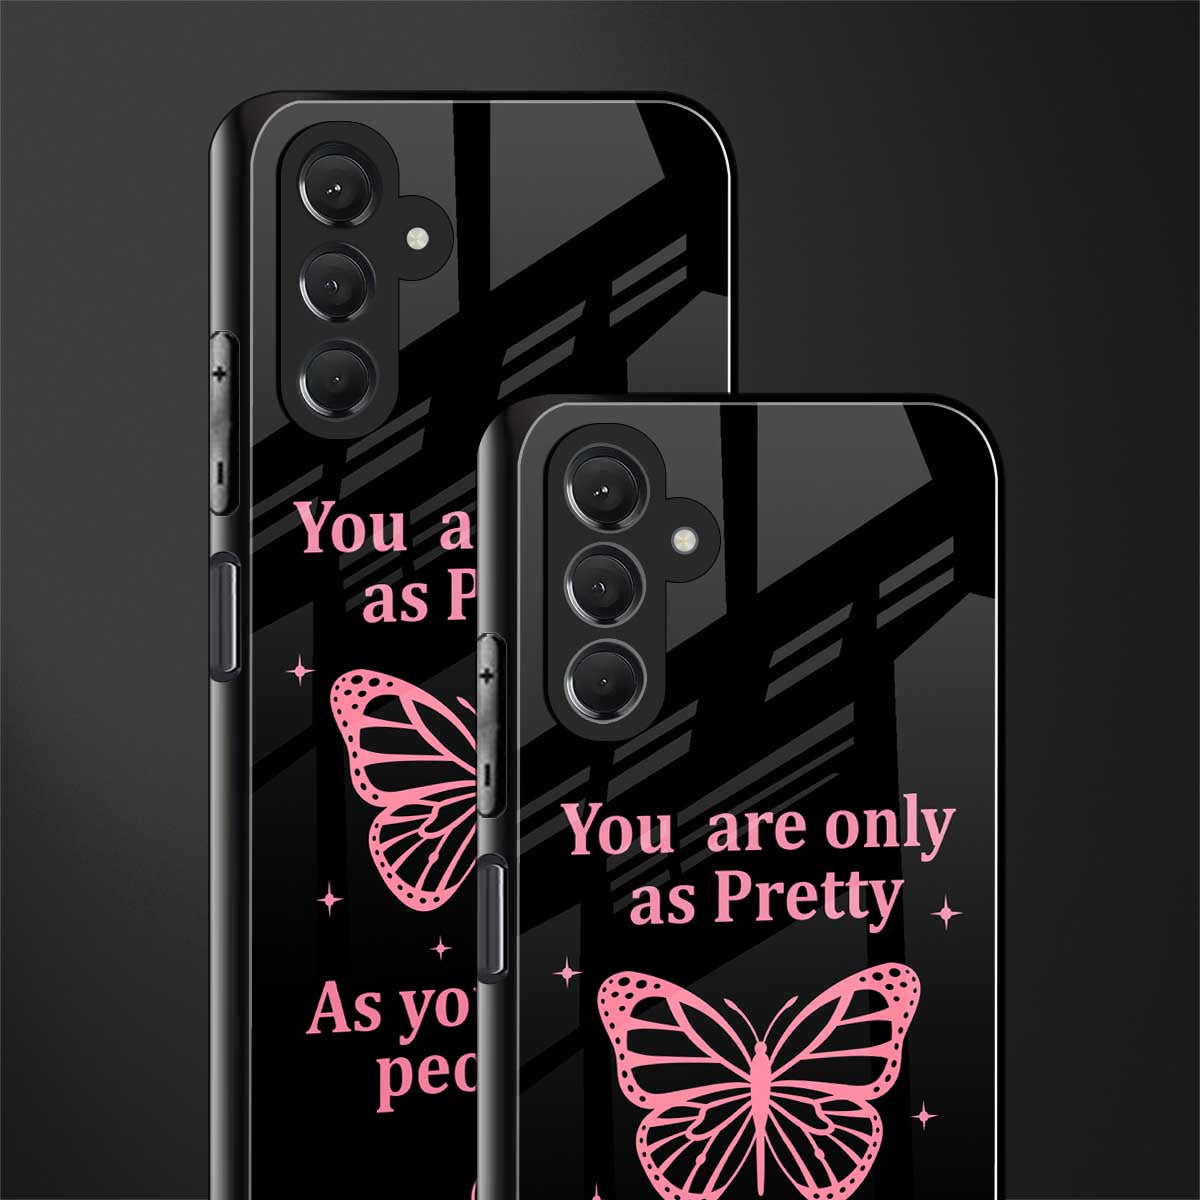 as pretty as you treat people back phone cover | glass case for samsun galaxy a24 4g